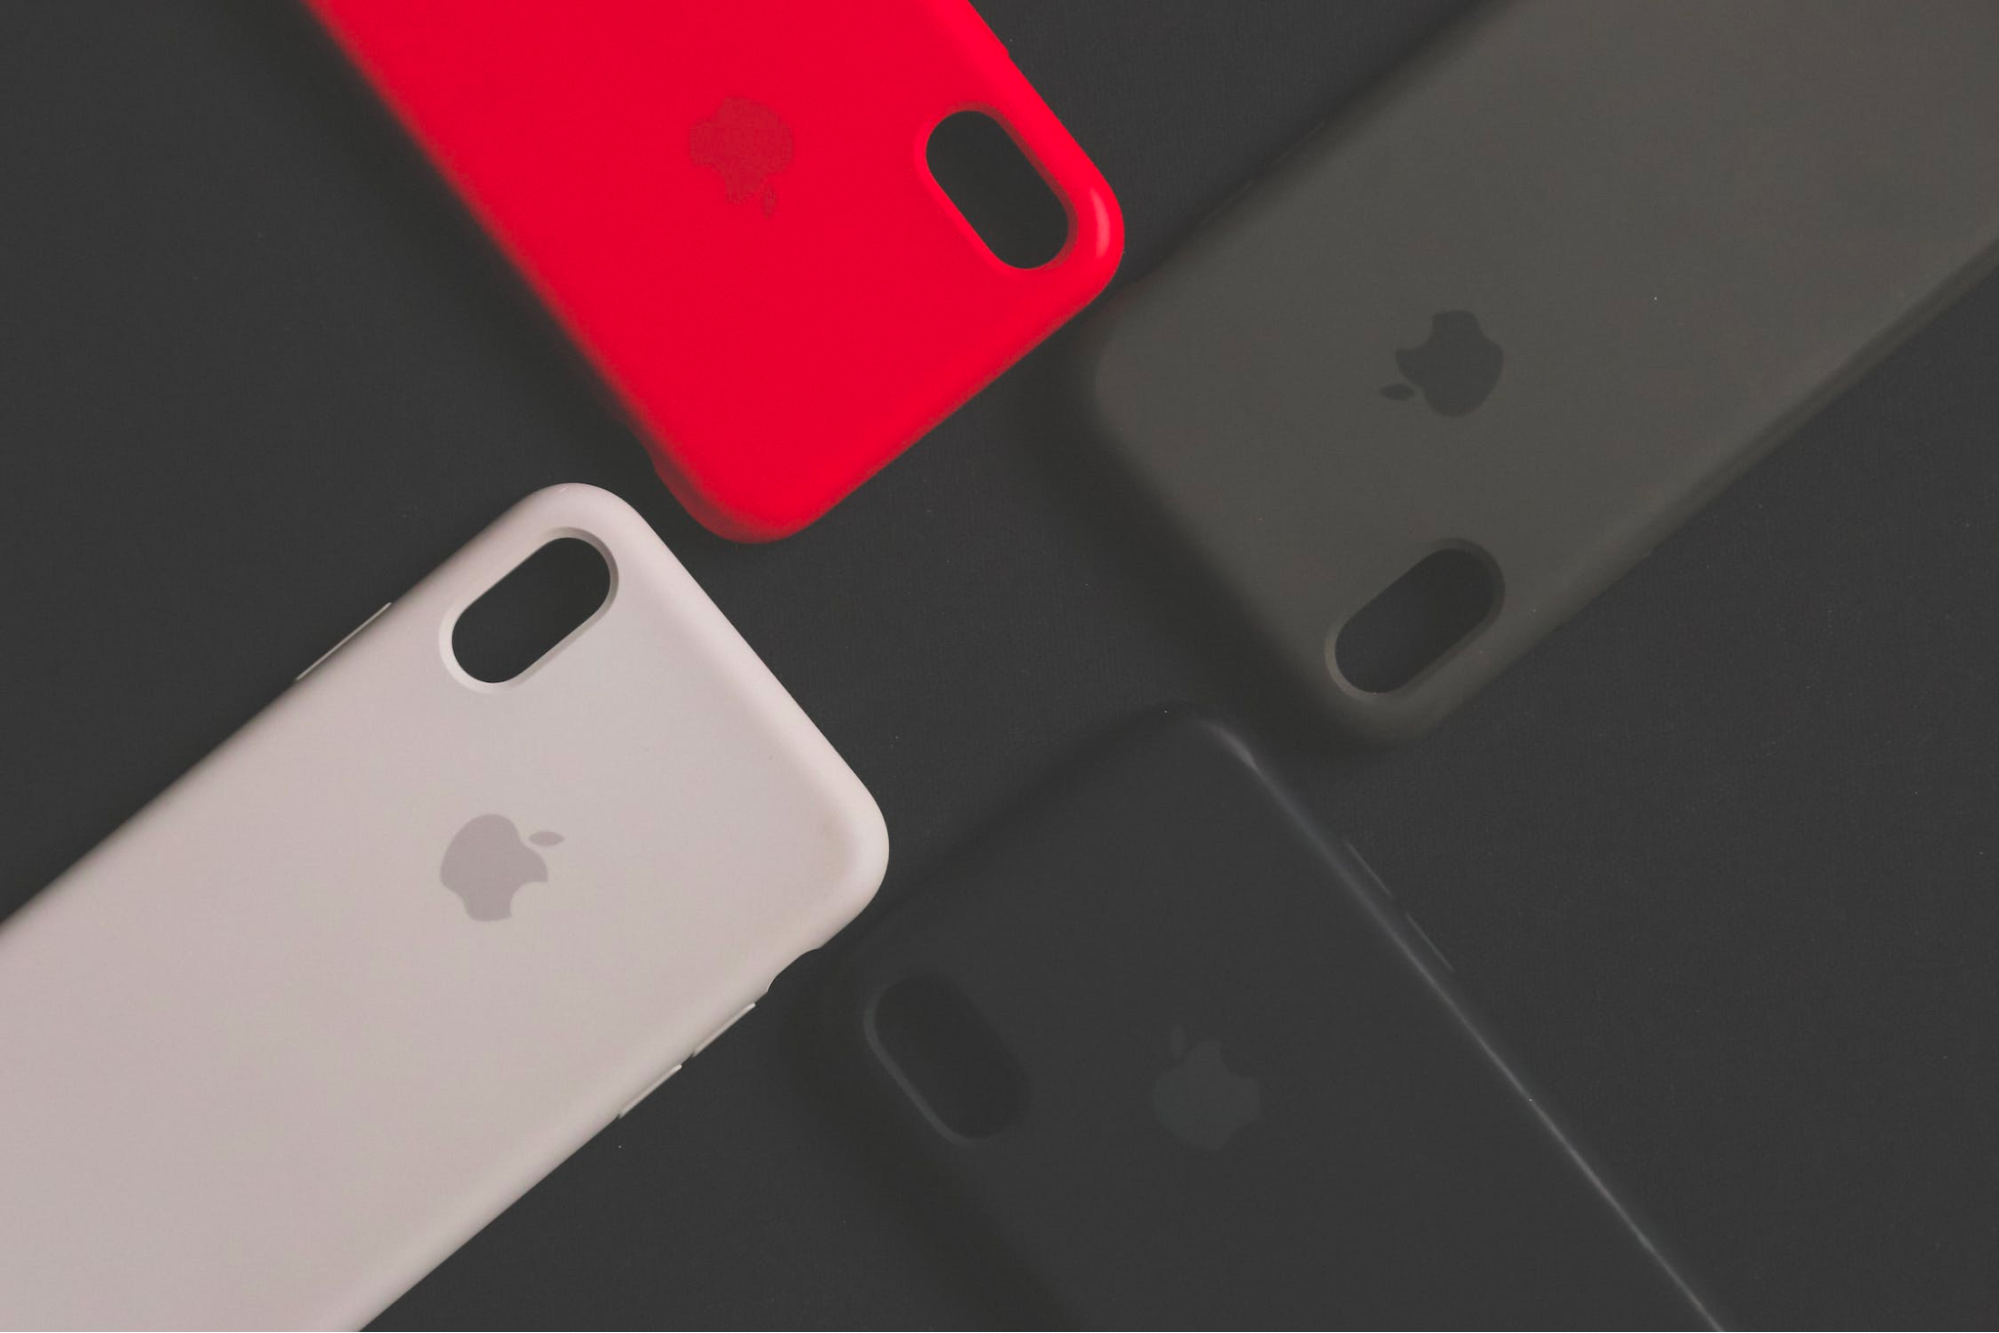 Four iPhone cases in various colors arranged on a black surface.